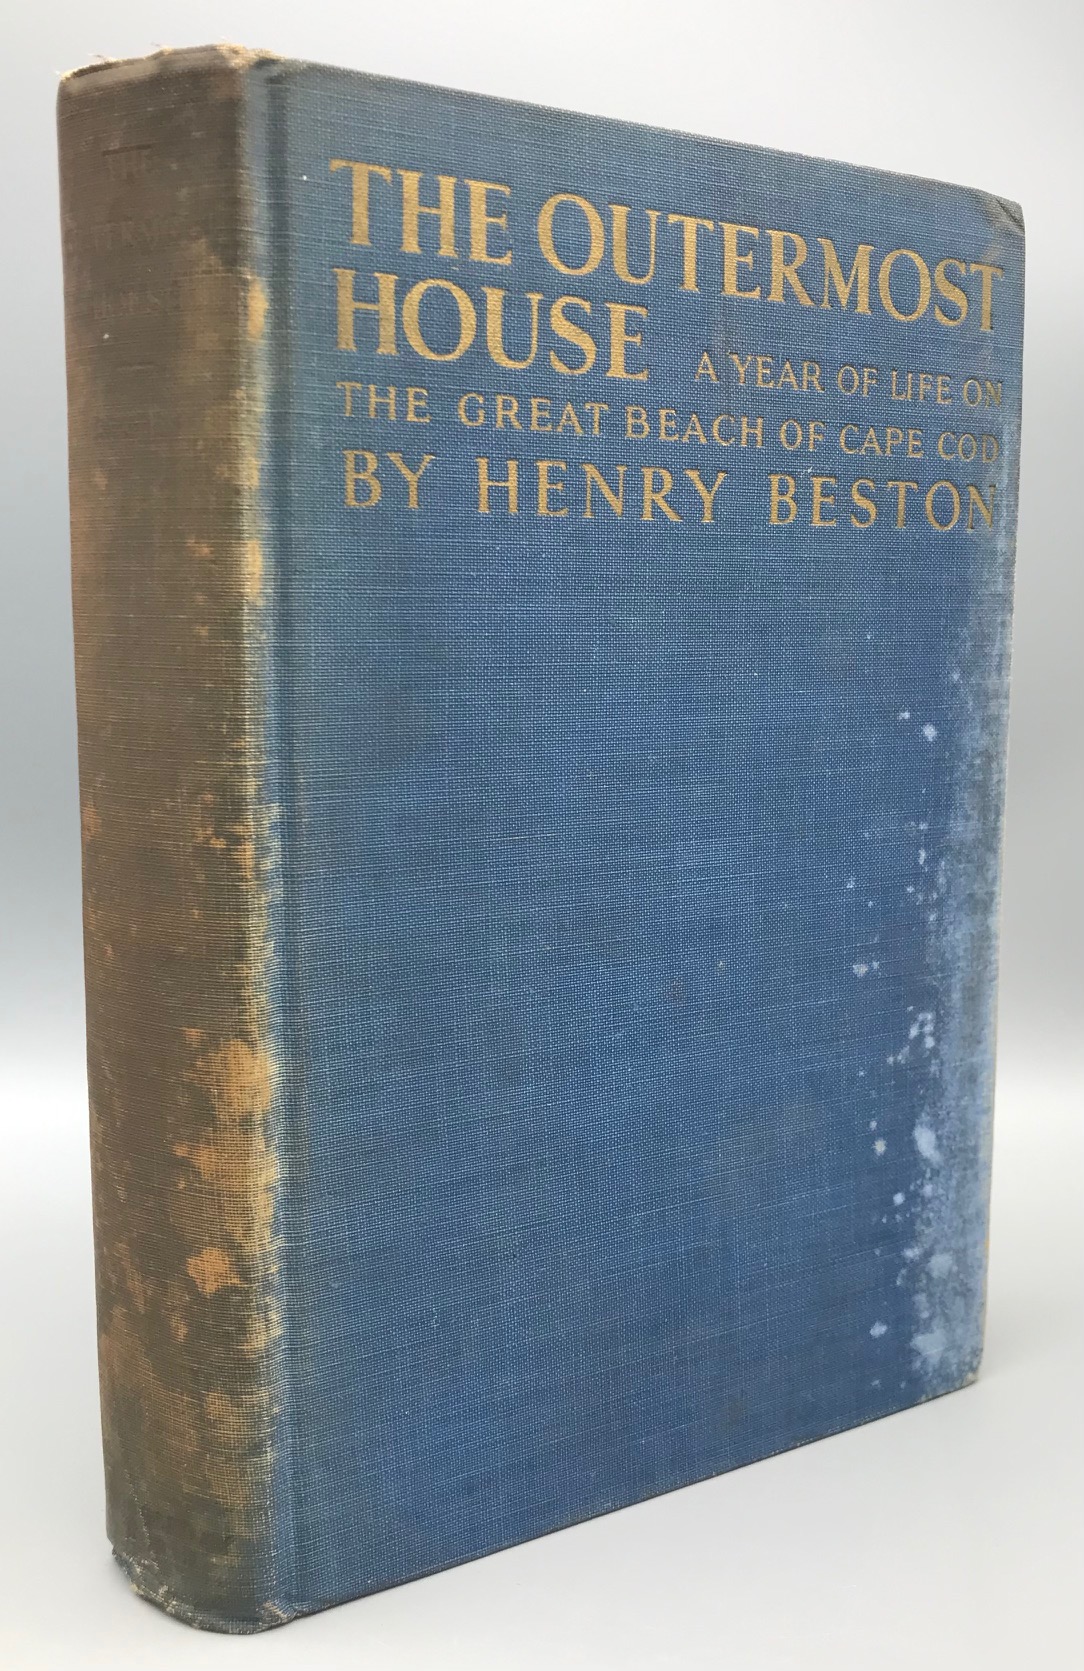 THE OUTERMOST HOUSE: A YEAR OF LIFE ON THE GREAT BEACH OF CAPE COD, by Henry Beston and William A. Bradford - 1930